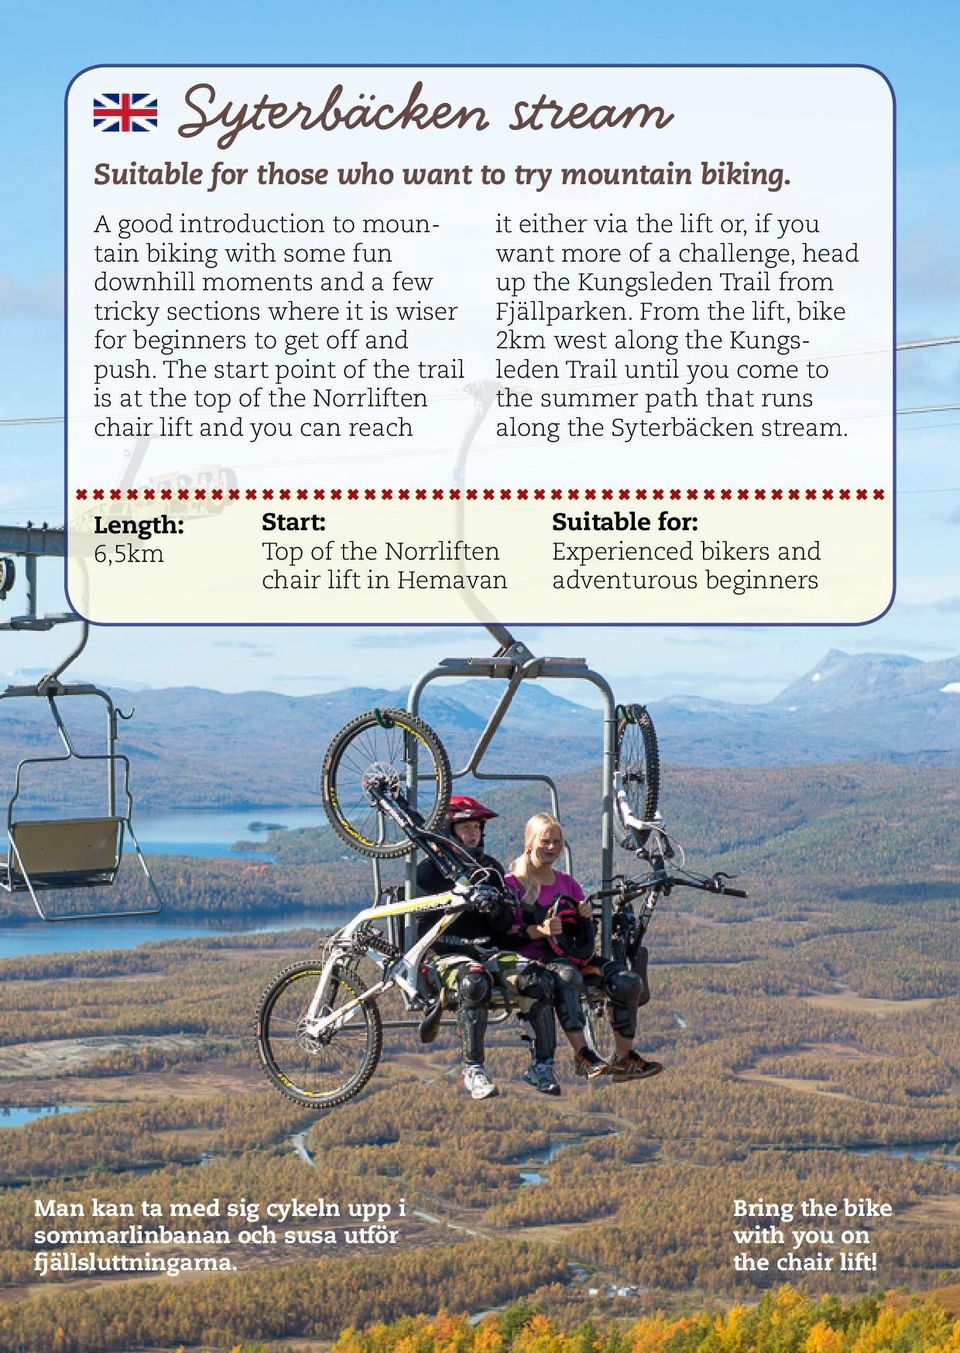 The start point of the trail is at the top of the Norrliften chair lift and you can reach it either via the lift or, if you want more of a challenge, head up the Kungsleden Trail from Fjällparken.